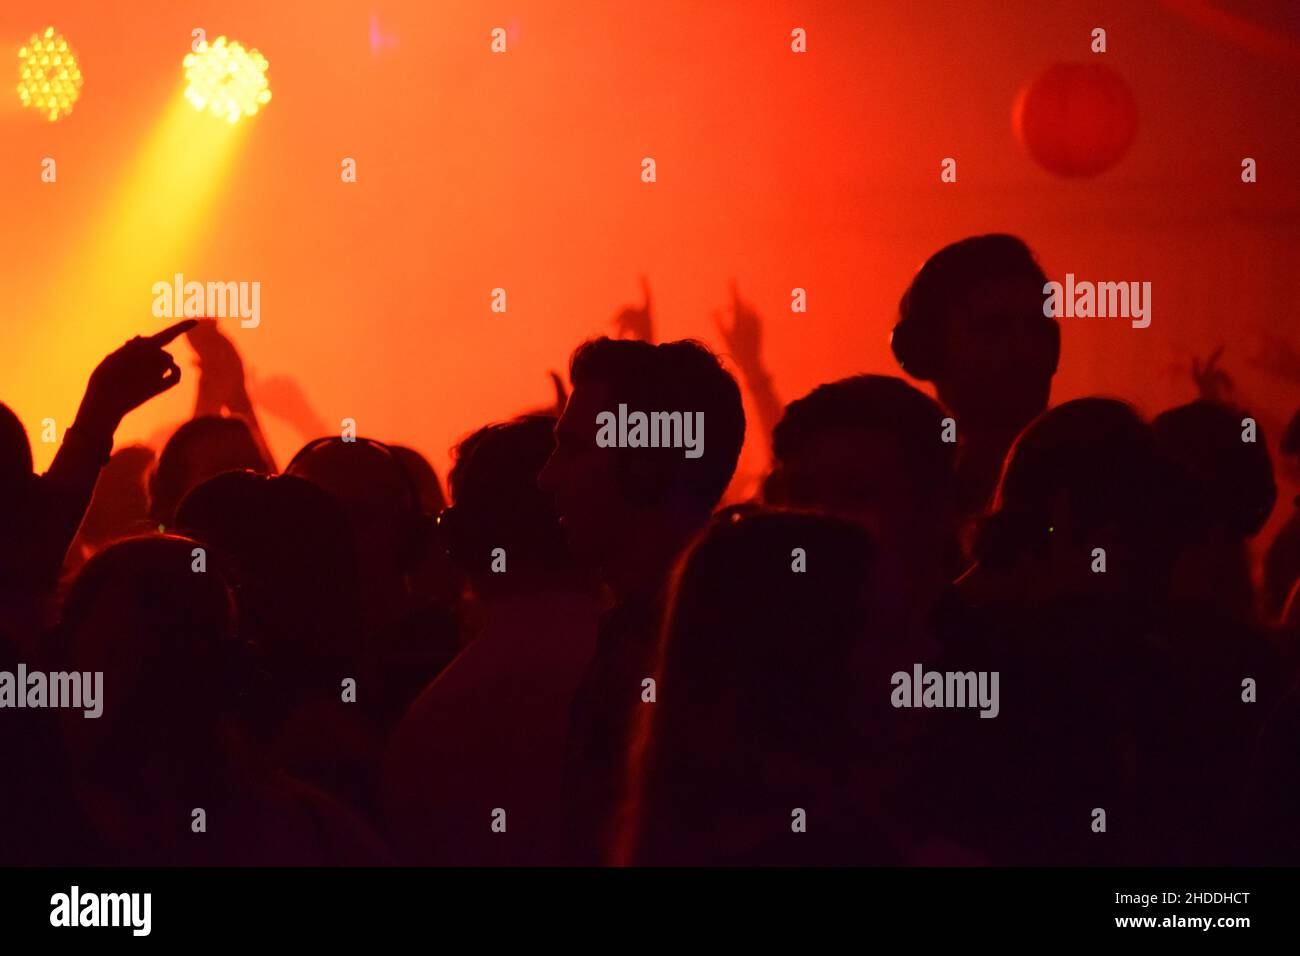 Reverse silhouette image of Dancers in a nightclub Stock Photo - Alamy